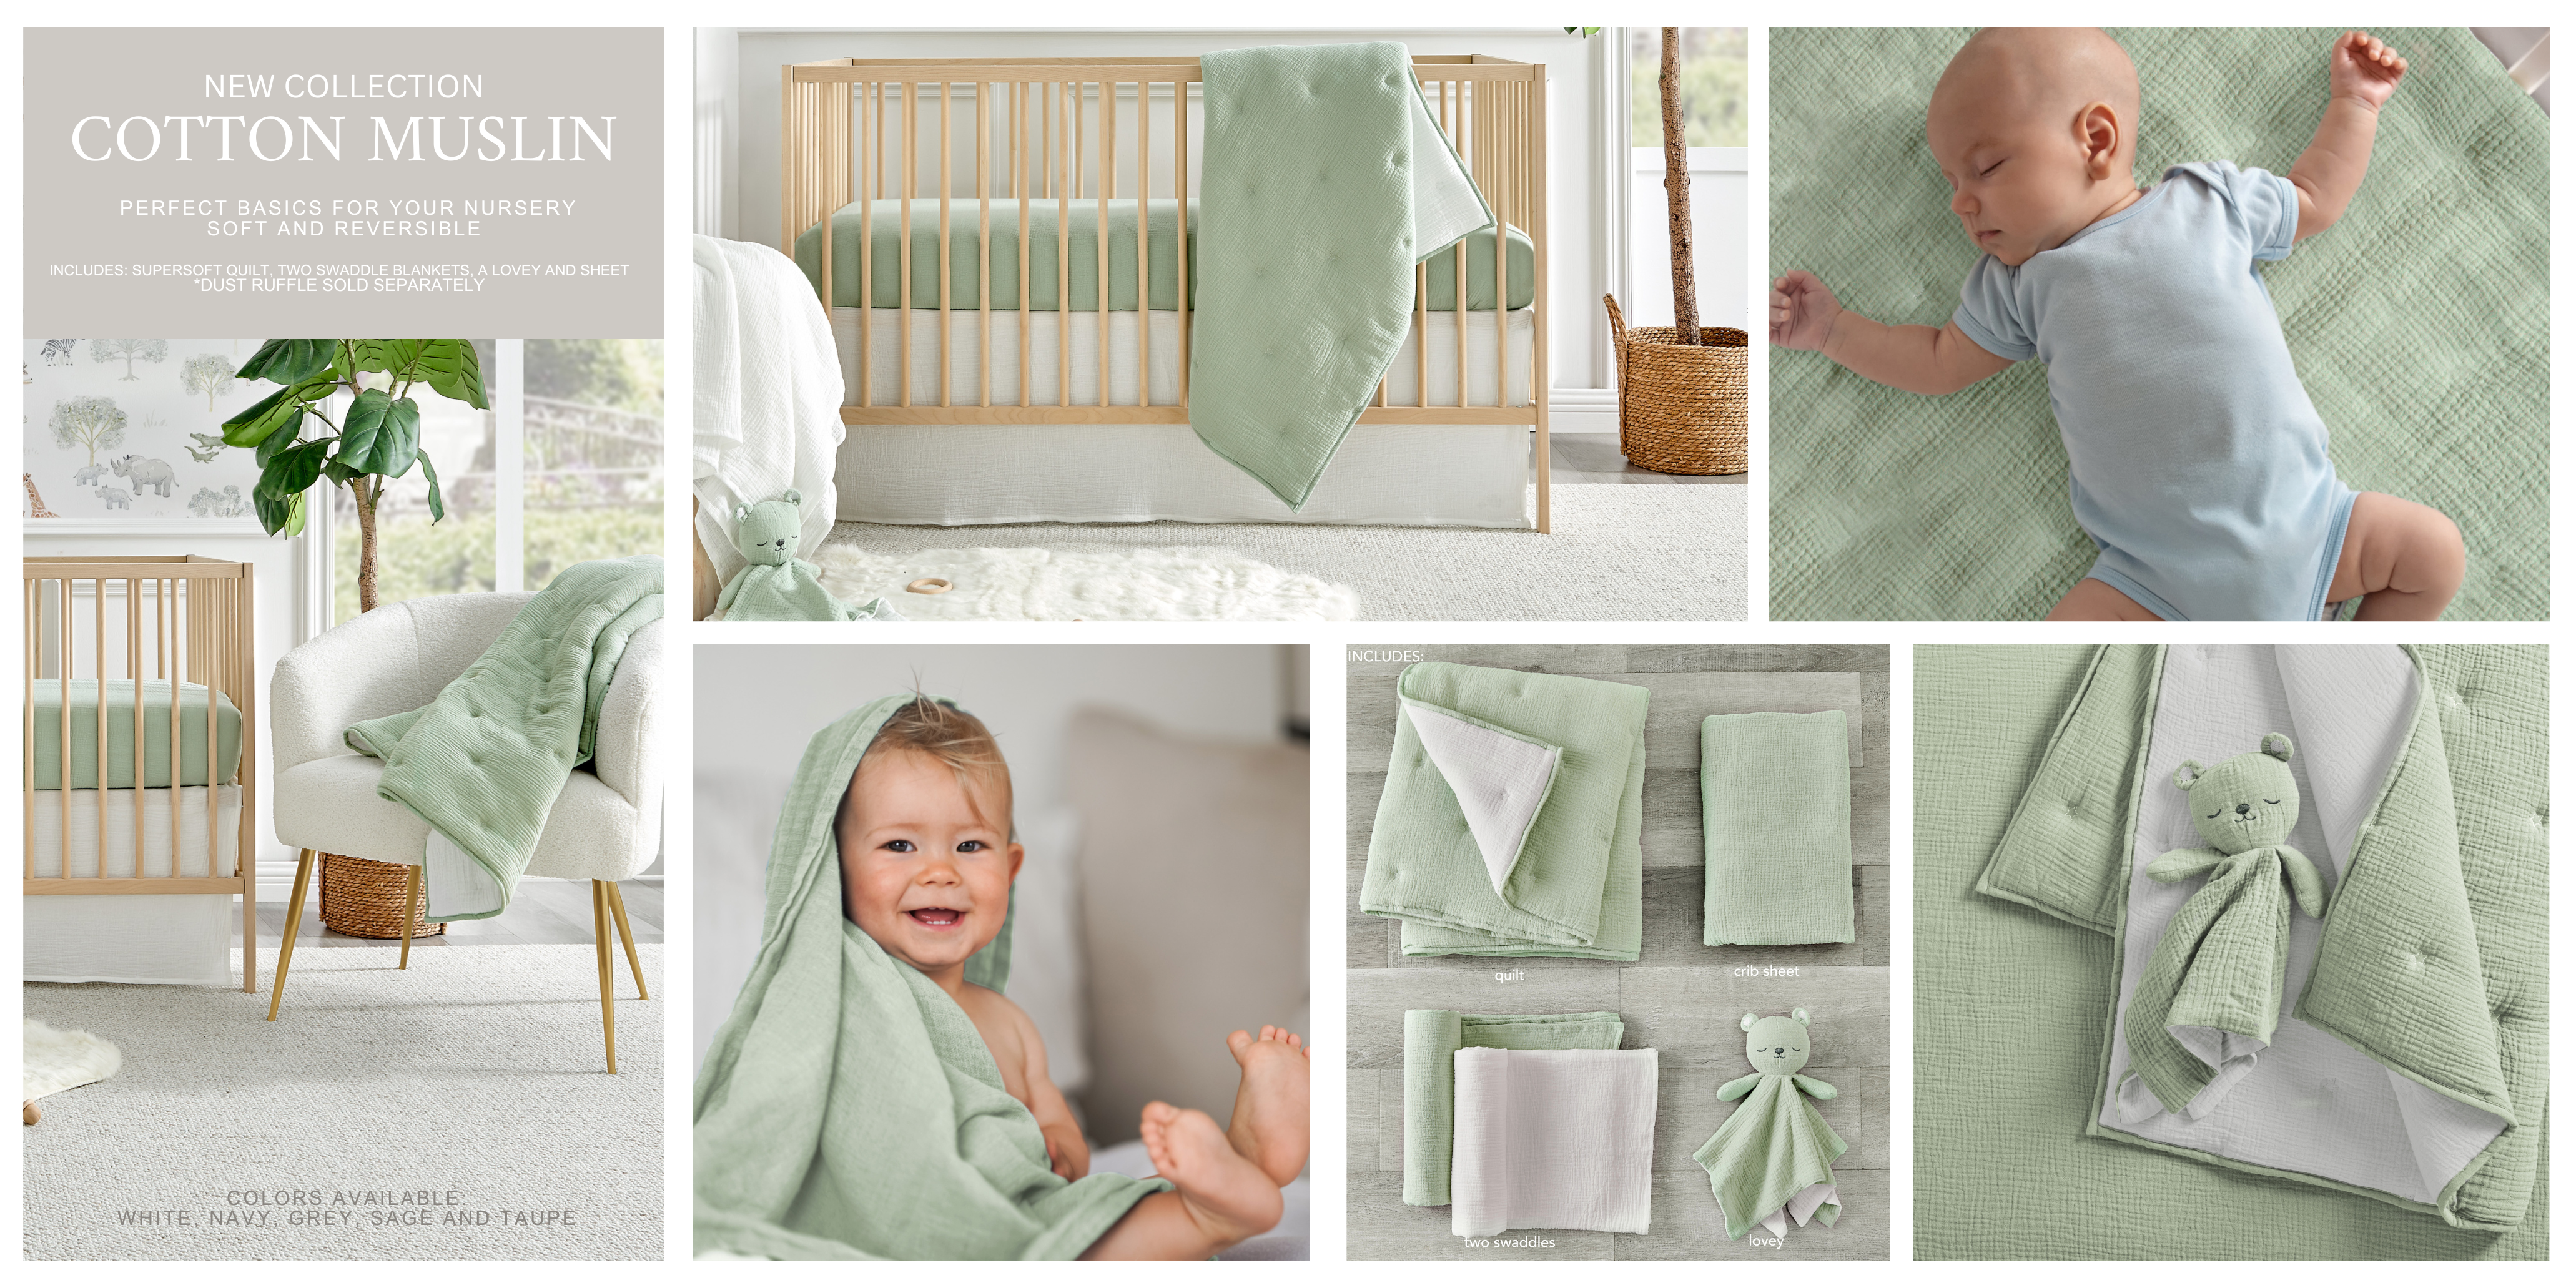 New Collection - Cotton Muslin by Levtex Baby